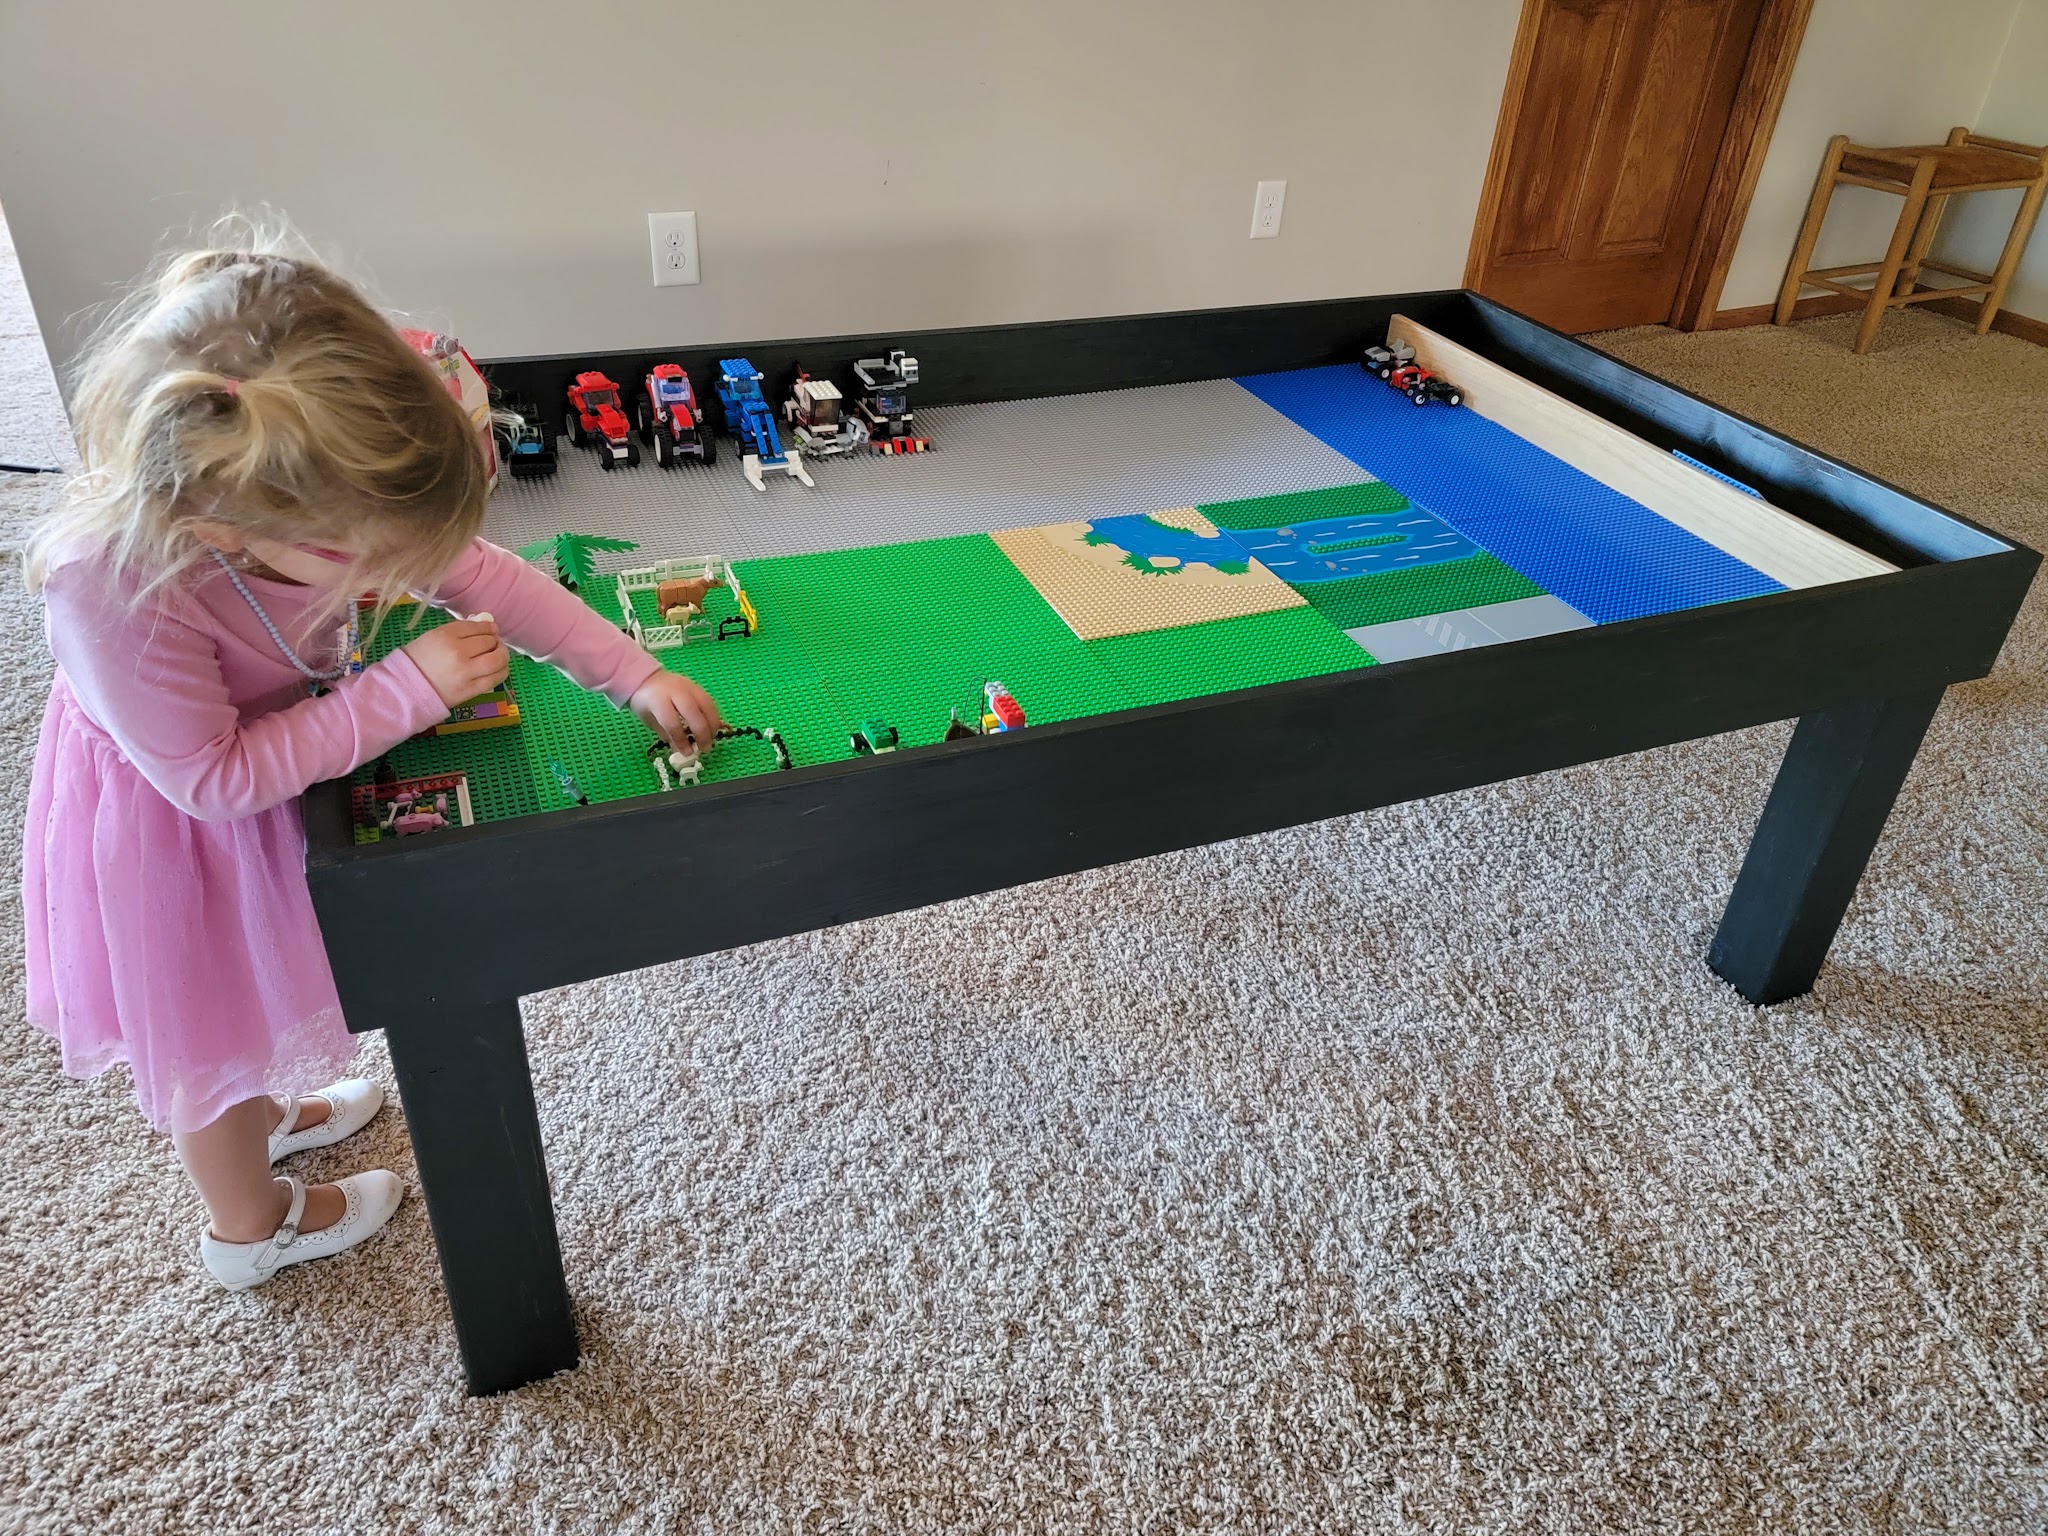 How We our Lego Table – simplify the